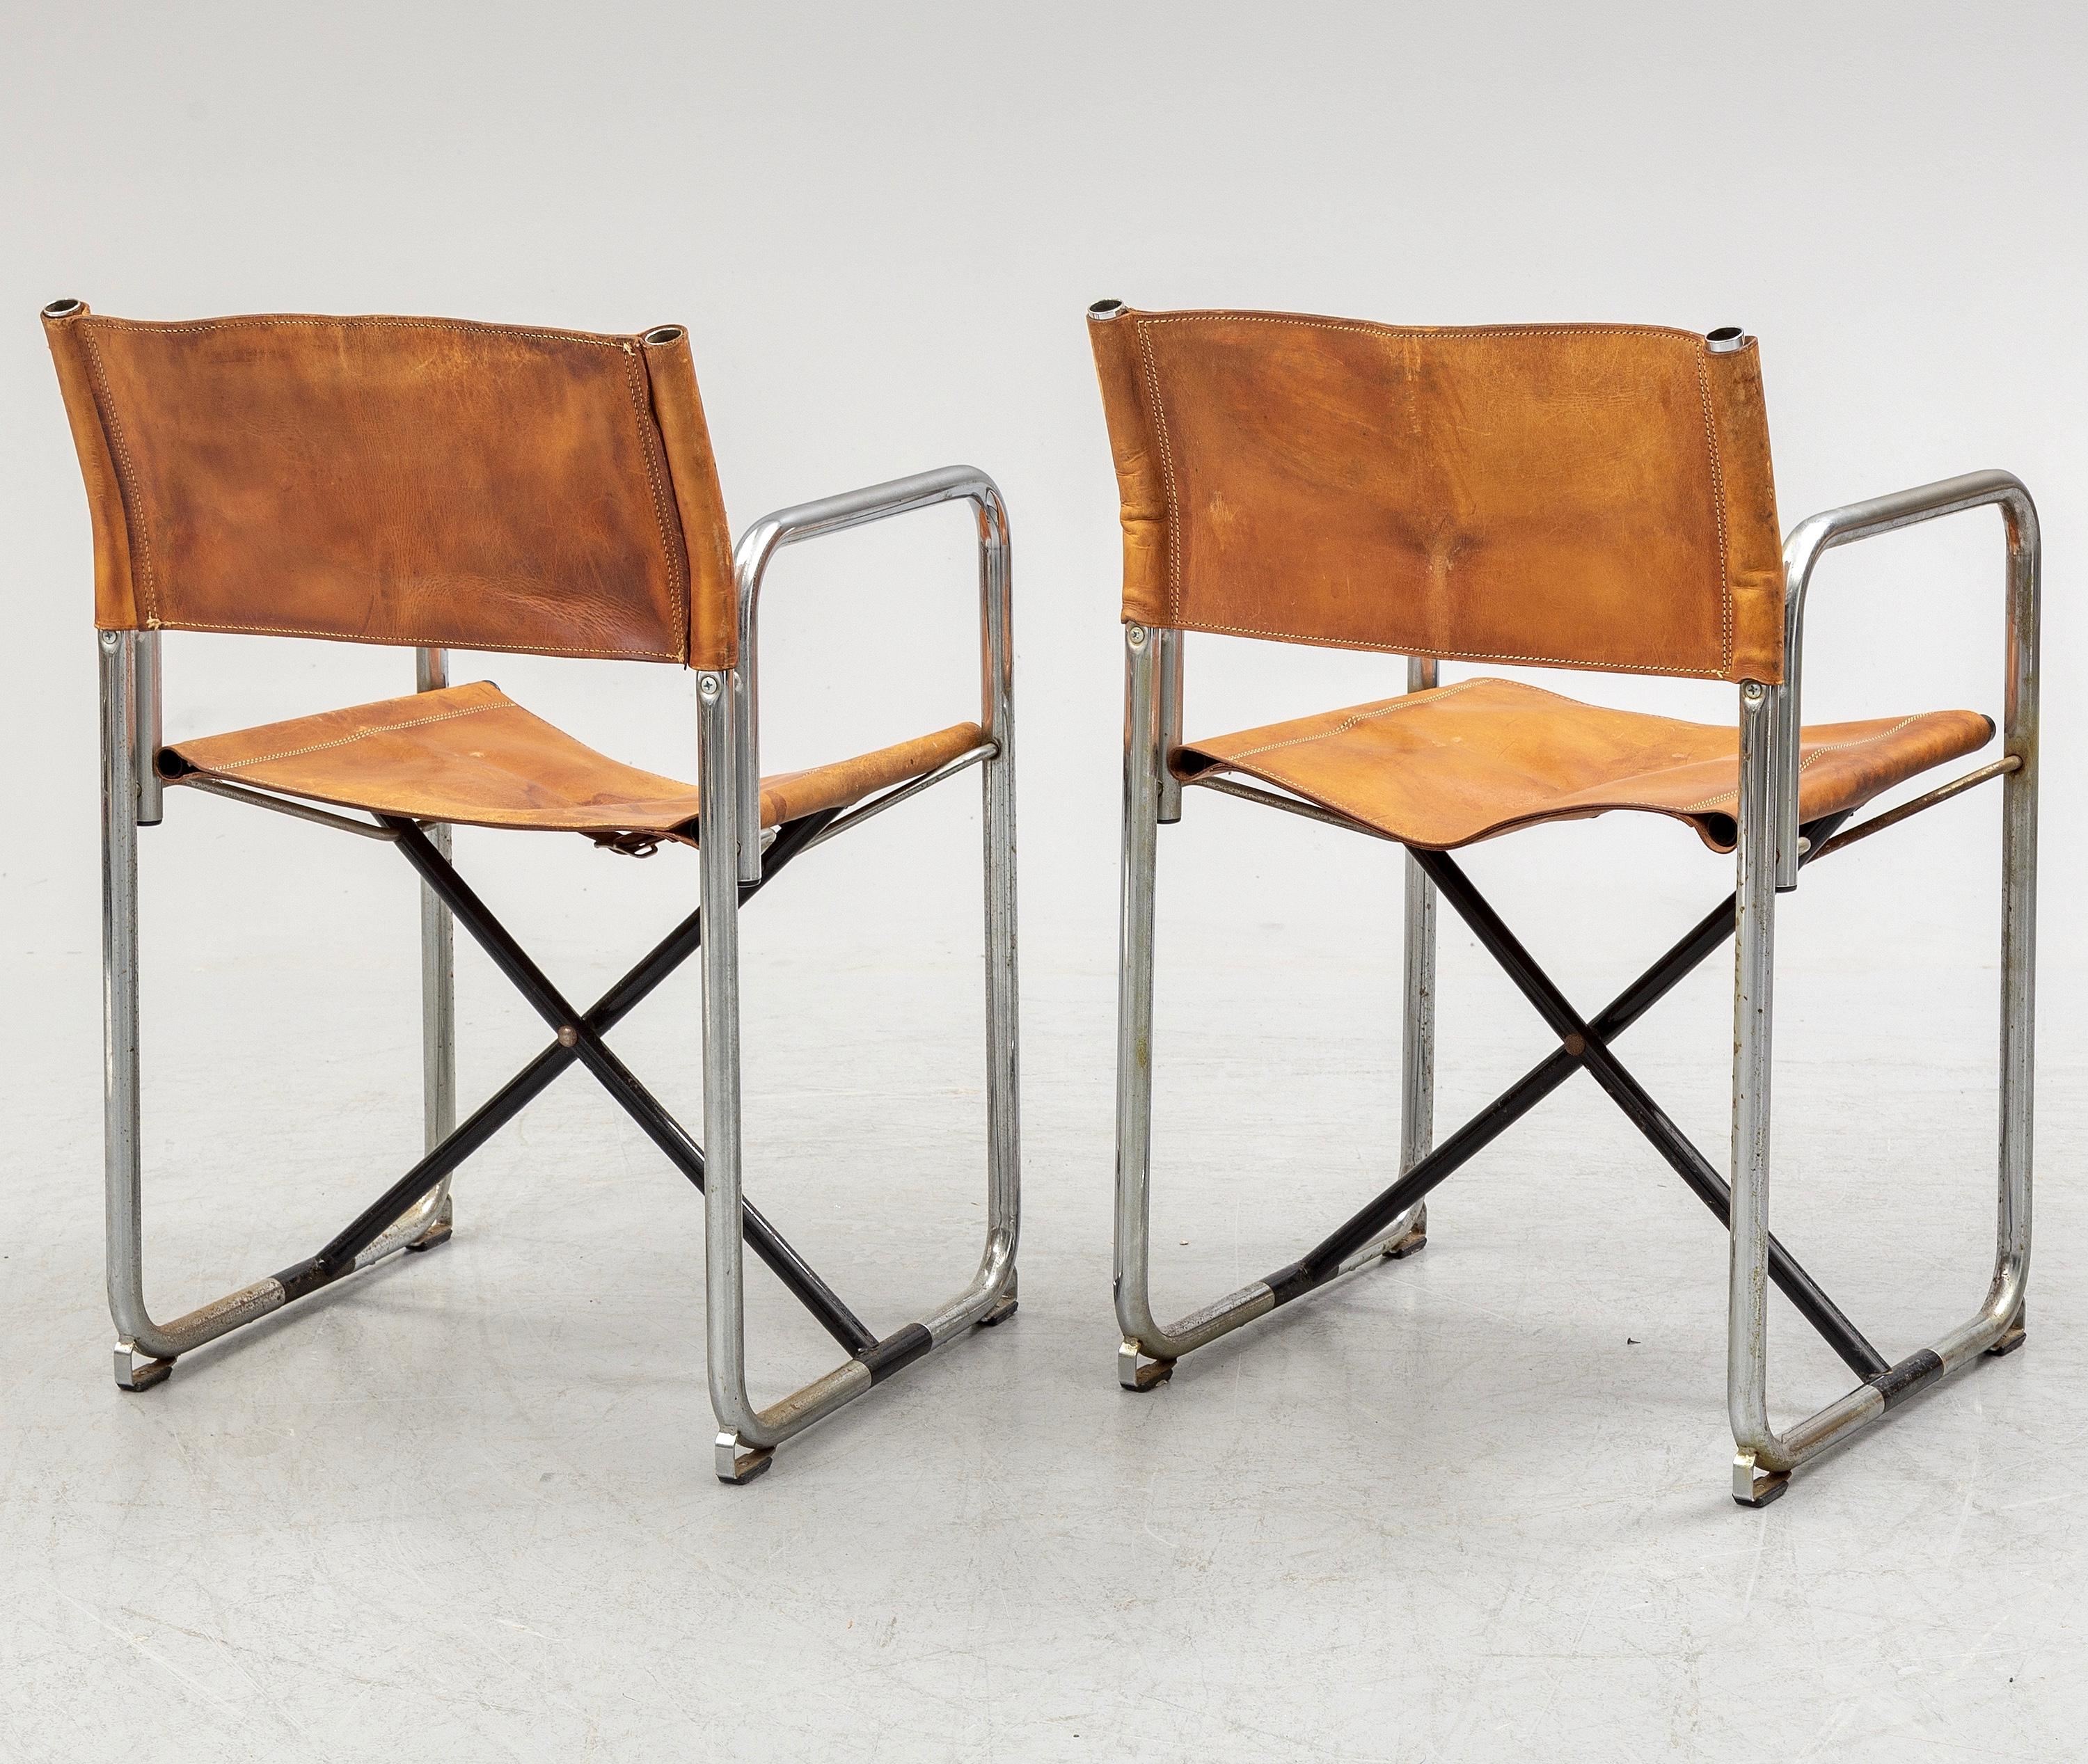 Early set of two folding chairs in chromed steel and original vegetal tanned leather, designed by Borge Lindau & Bo Lindekrantz and produced from the 60s by Swedish Lammhults.